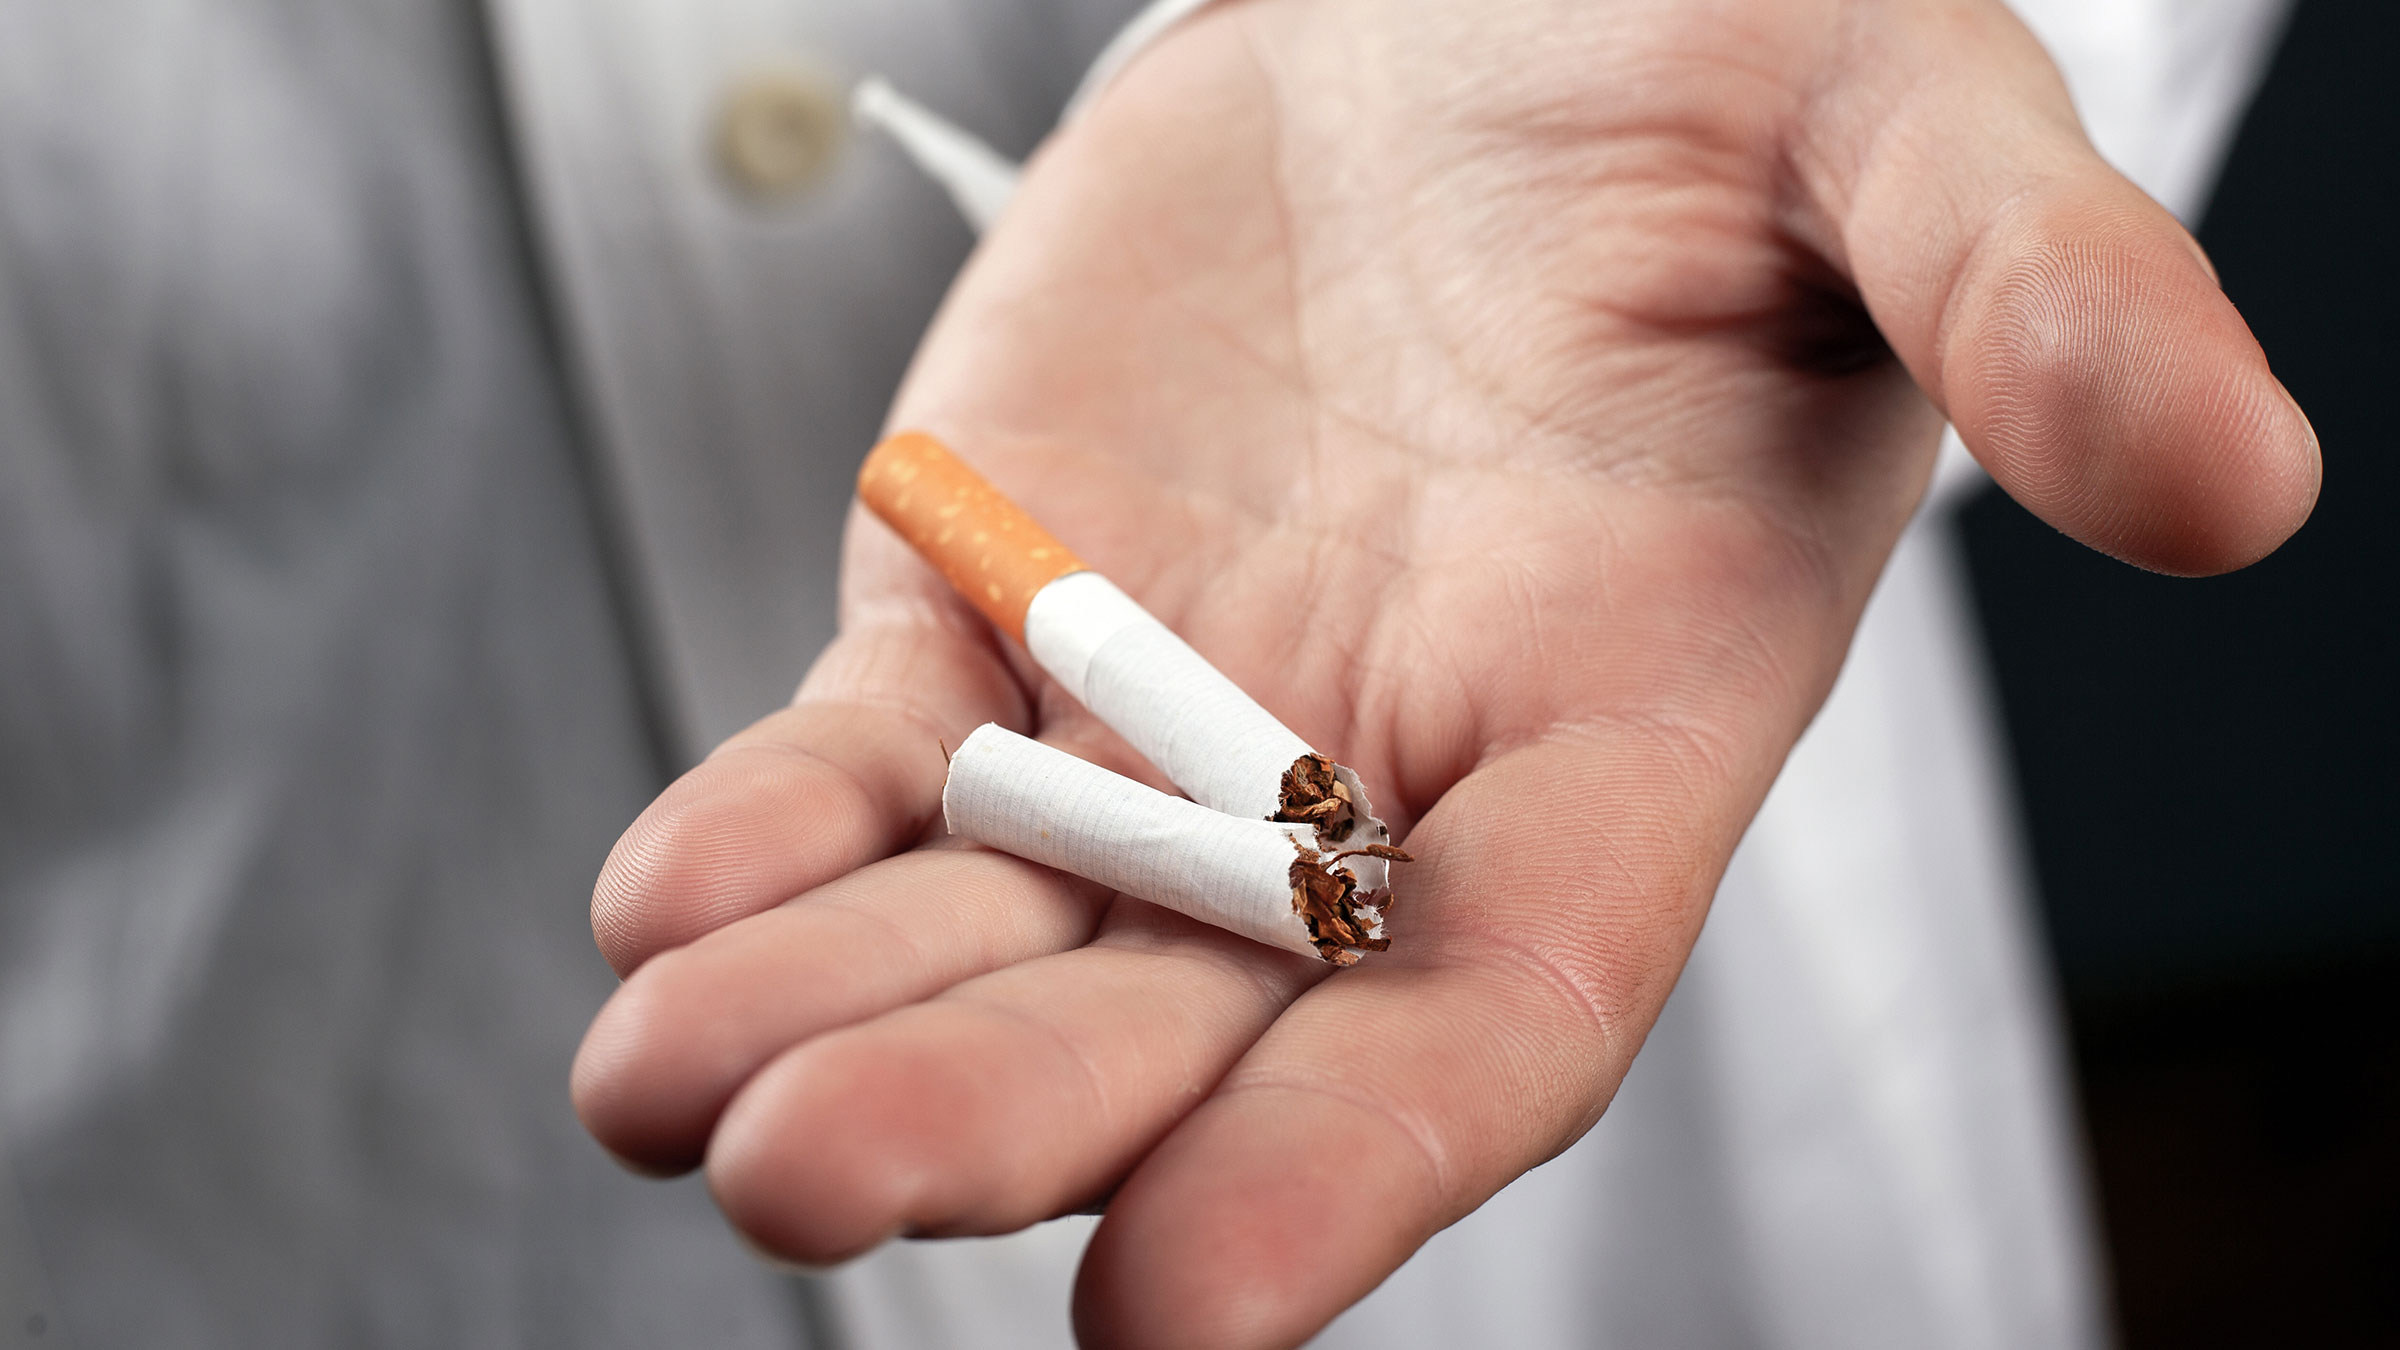 Cytisine – The Old, New Quit Smoking Therapy